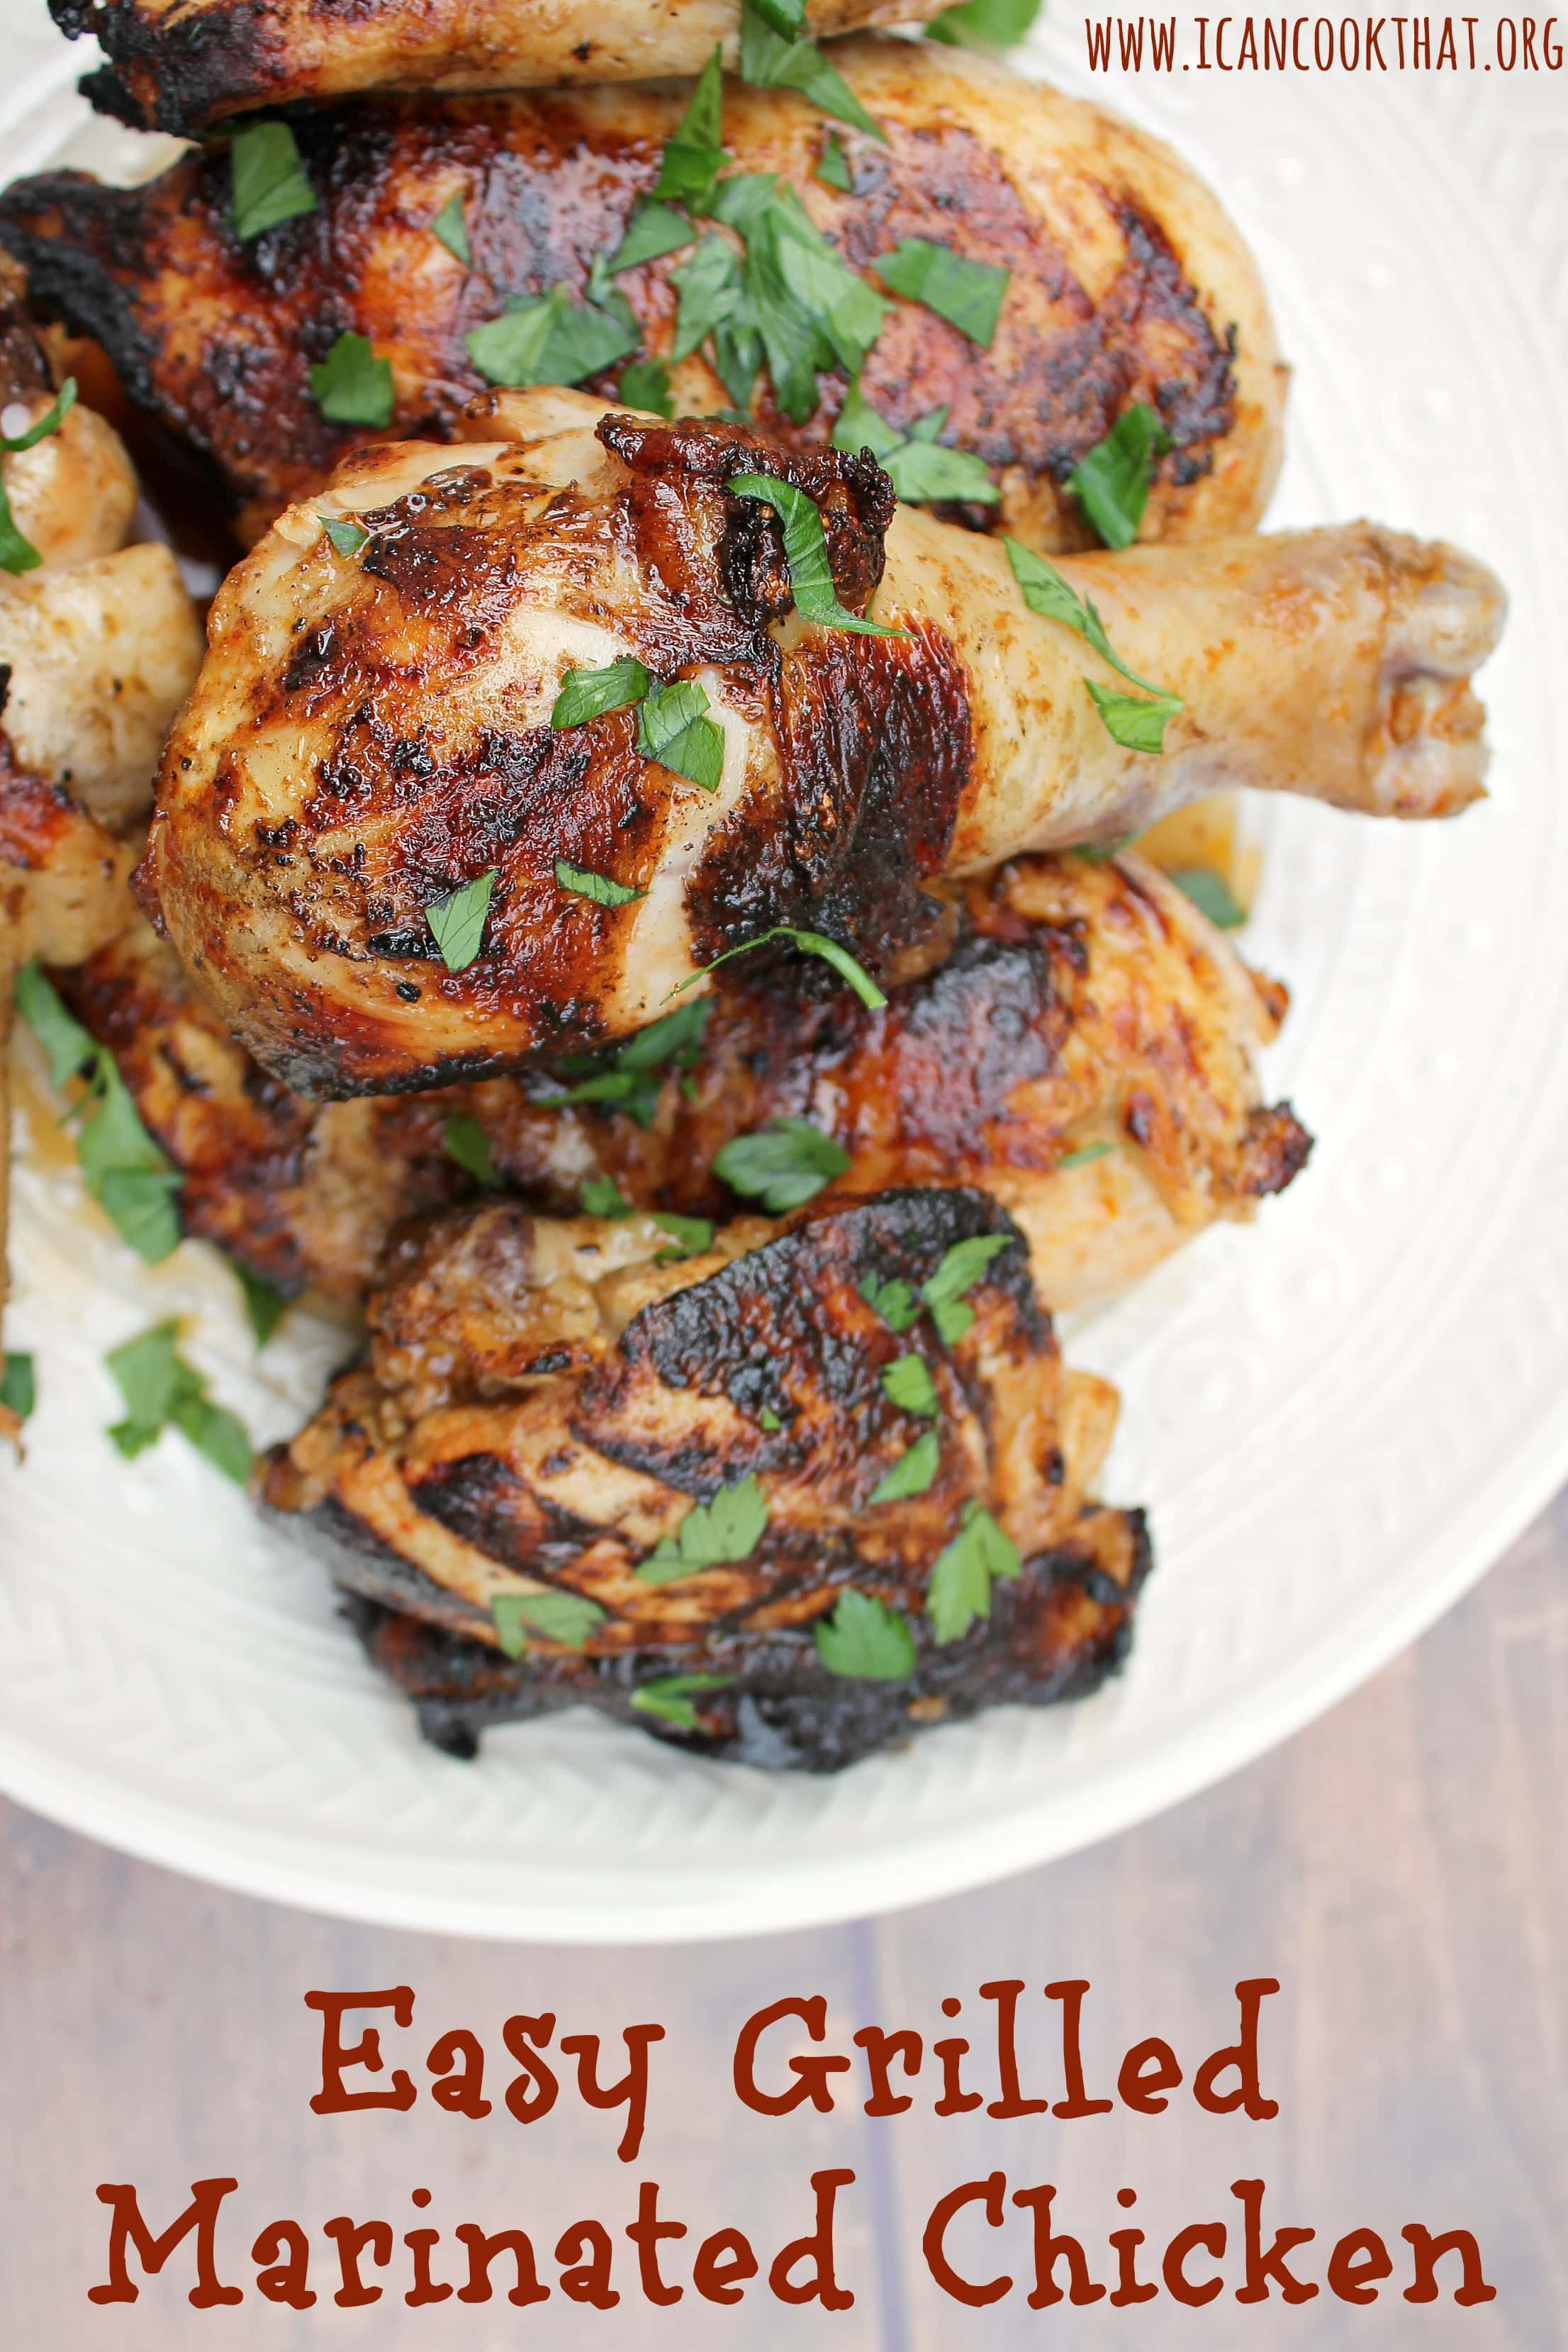 Easy Grilled Marinated Chicken